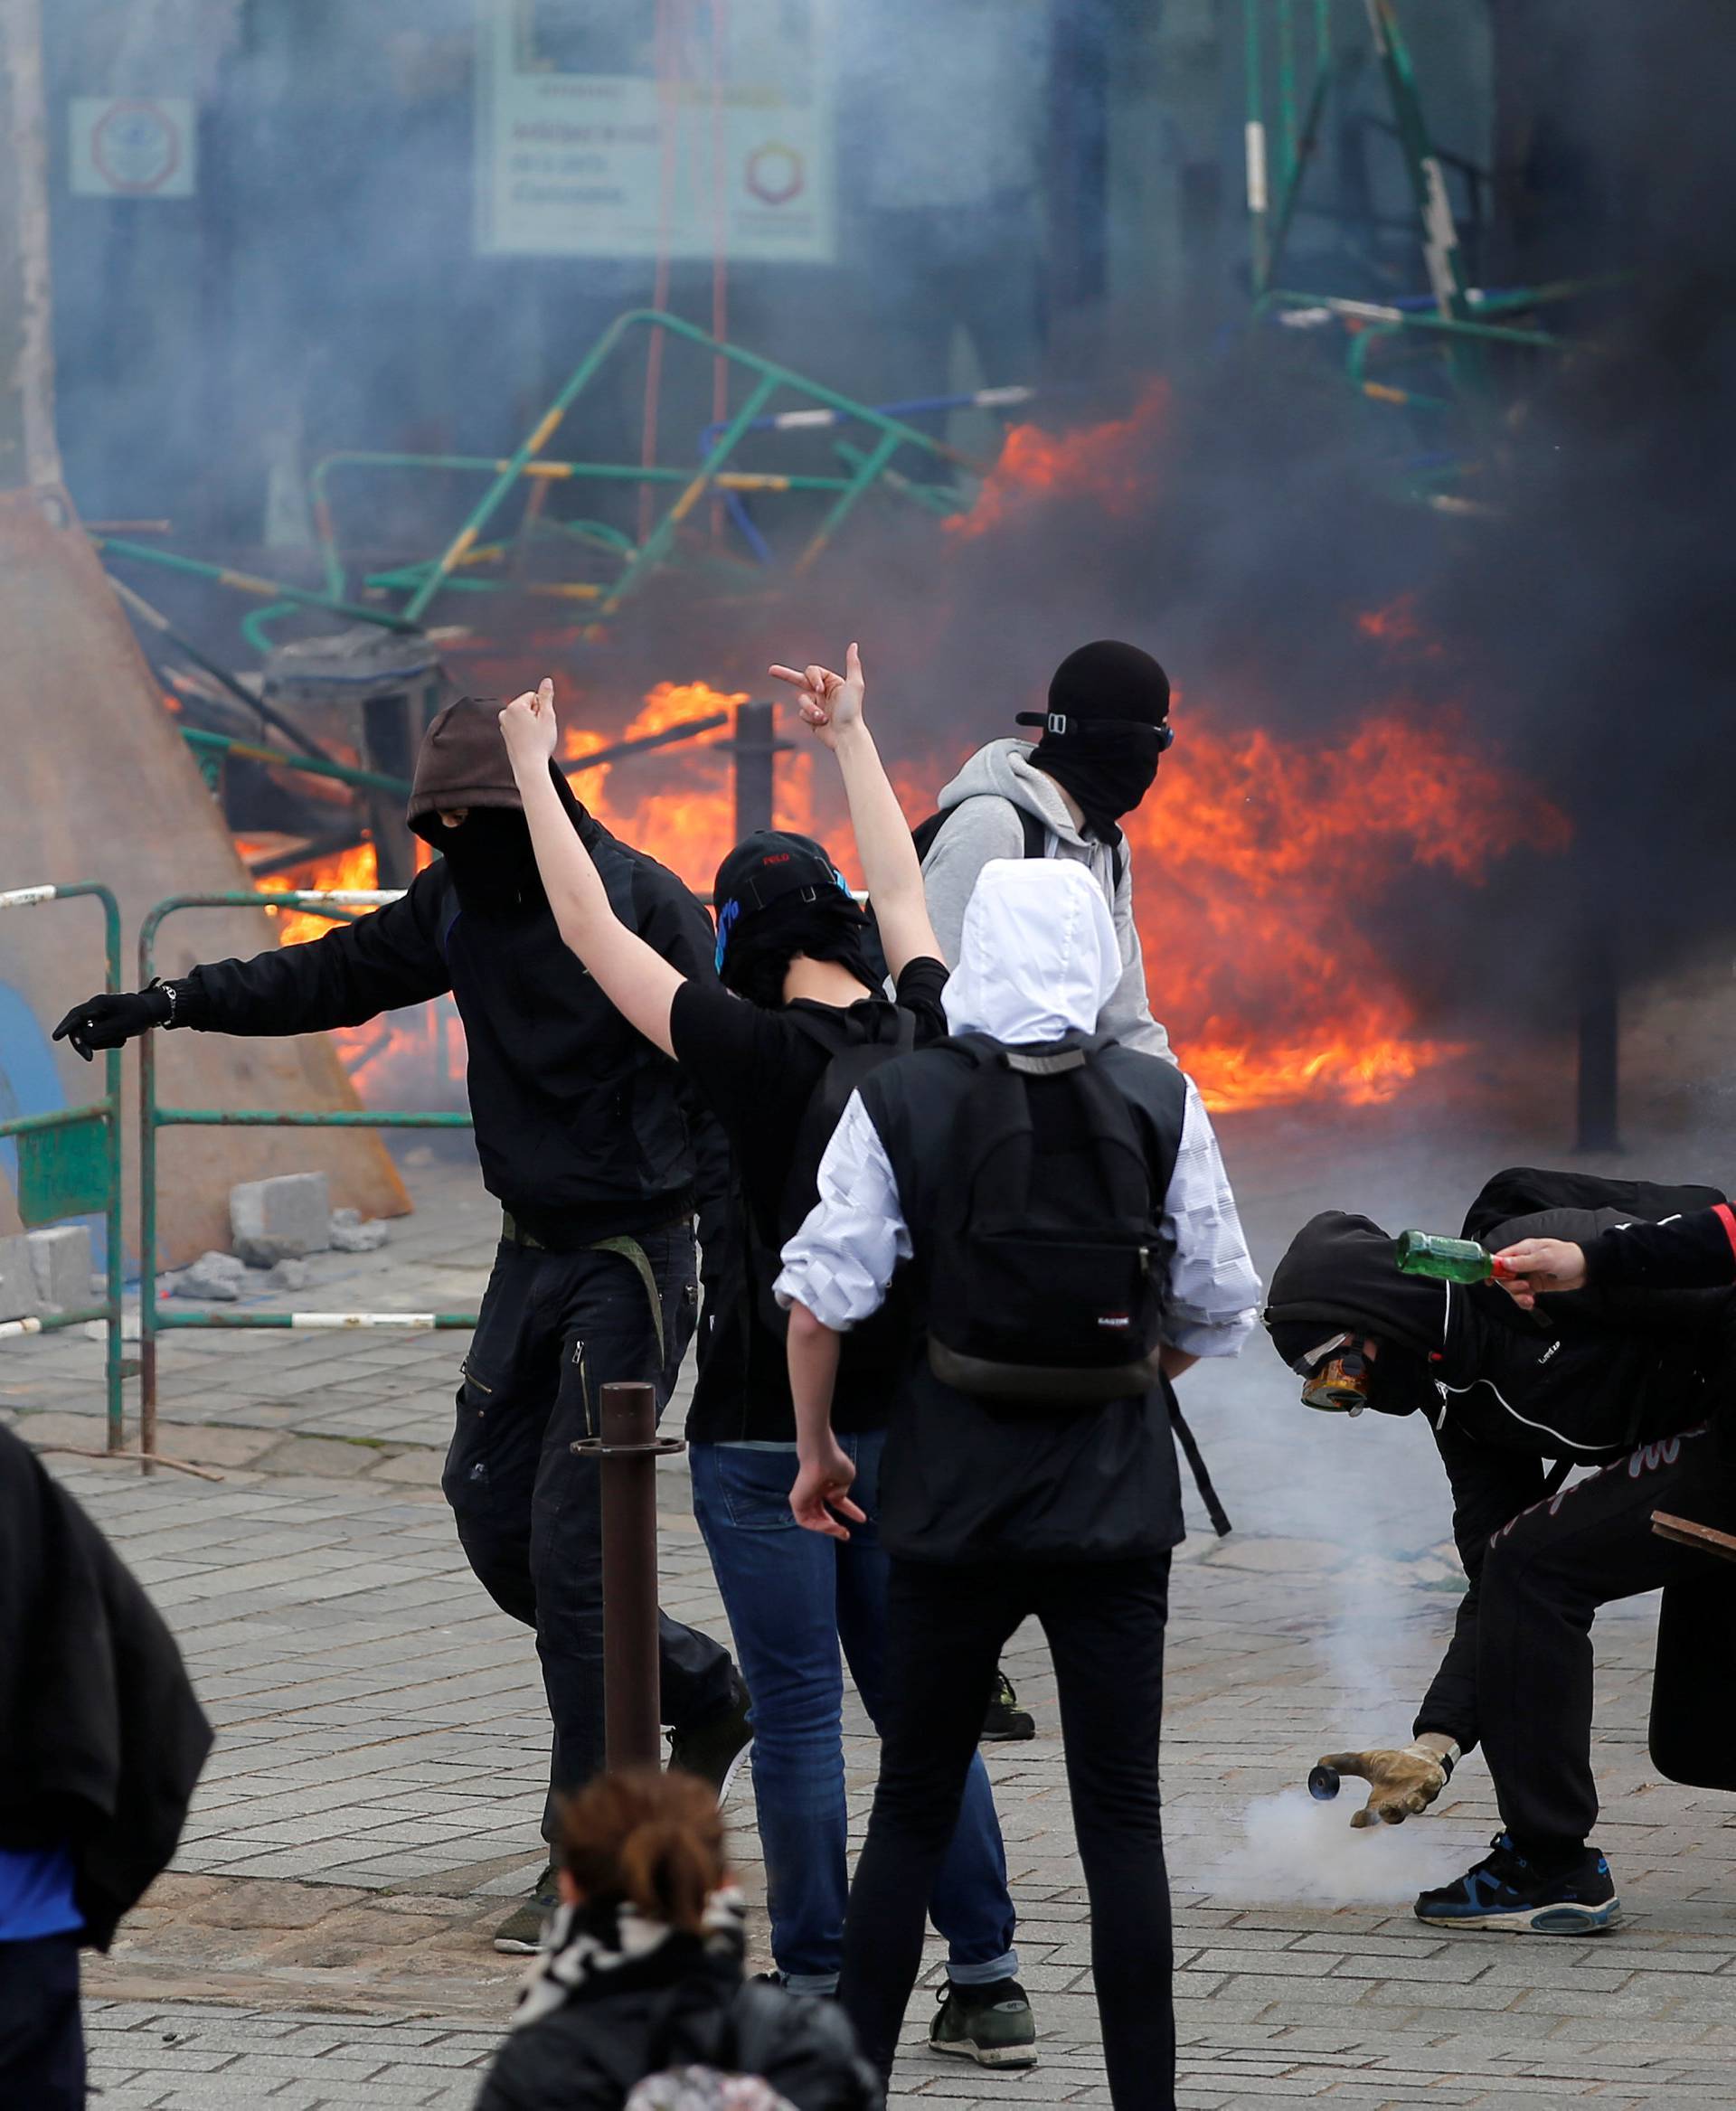 Youths take cover from tear gas during clashes during a demonstration against the French labour law proposal in Nantes